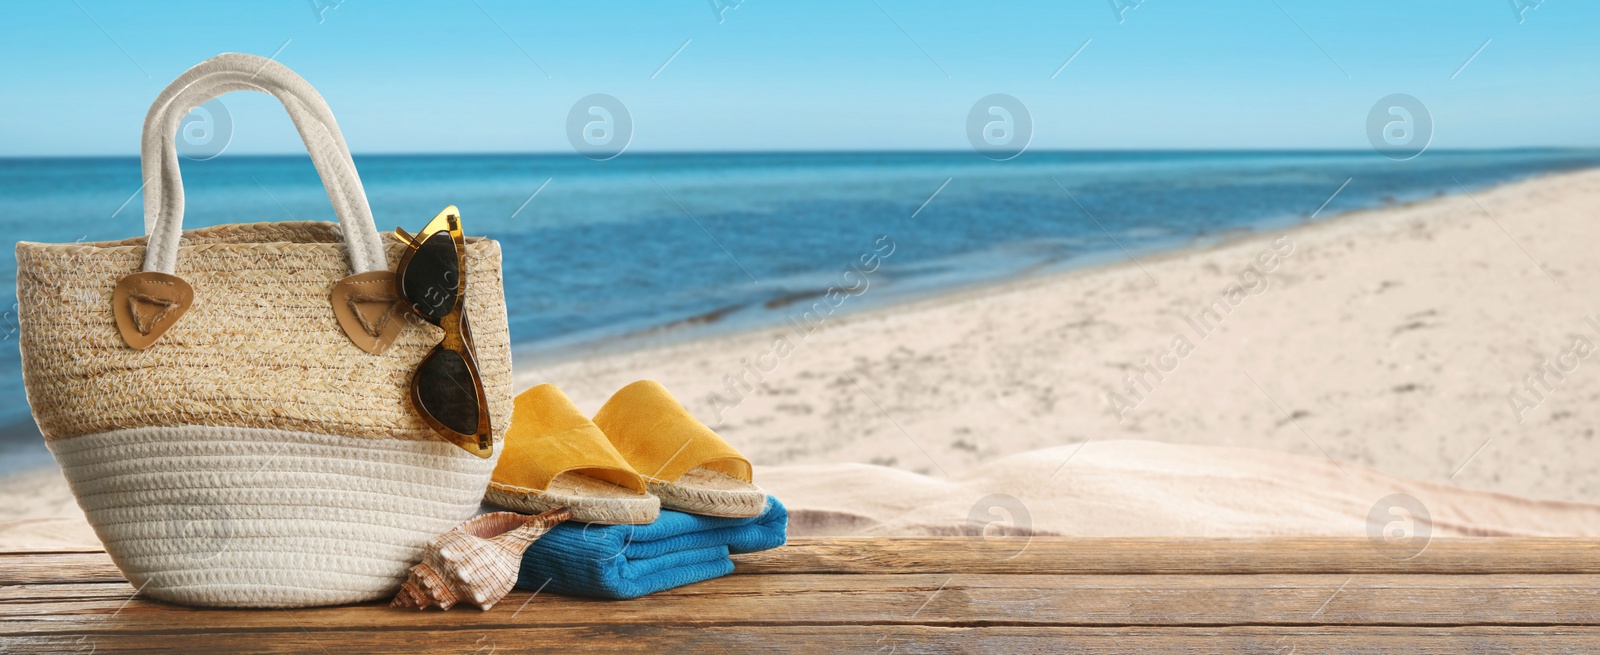 Image of Beach accessories on wooden surface near sea, space for text. Banner design 